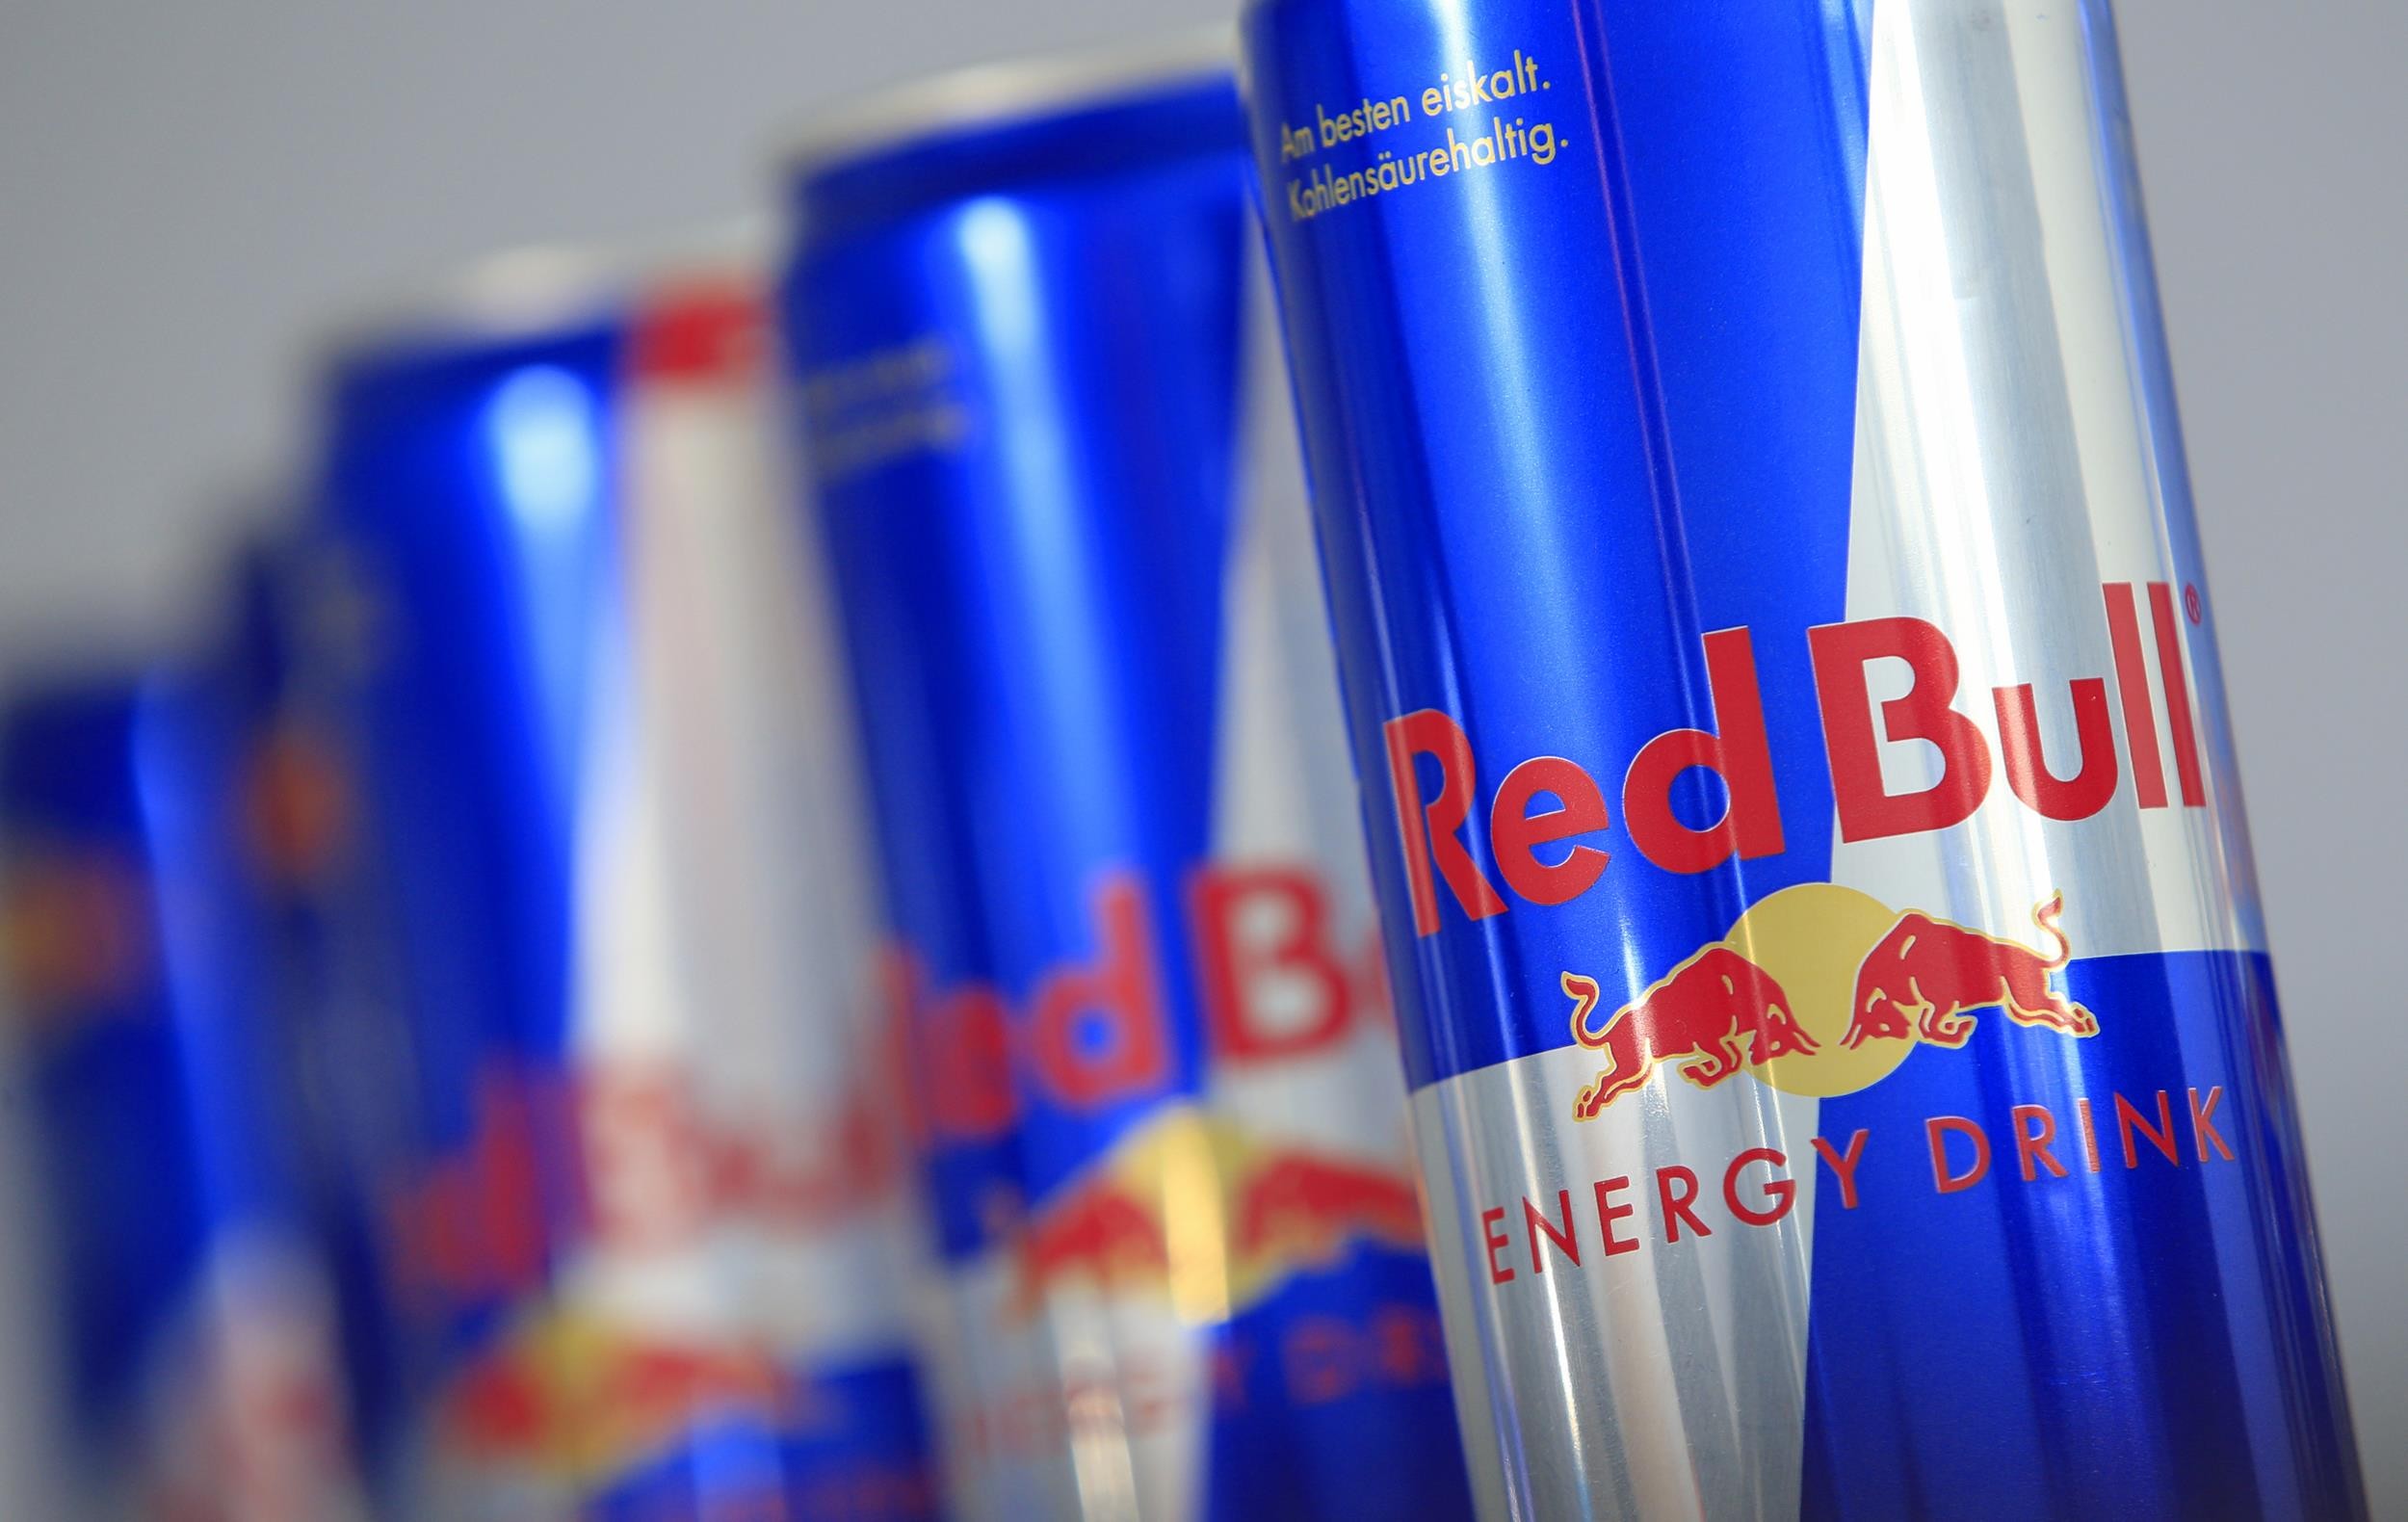 What are the animals seen cans of the Red Bull energy drink? | South China Morning Post